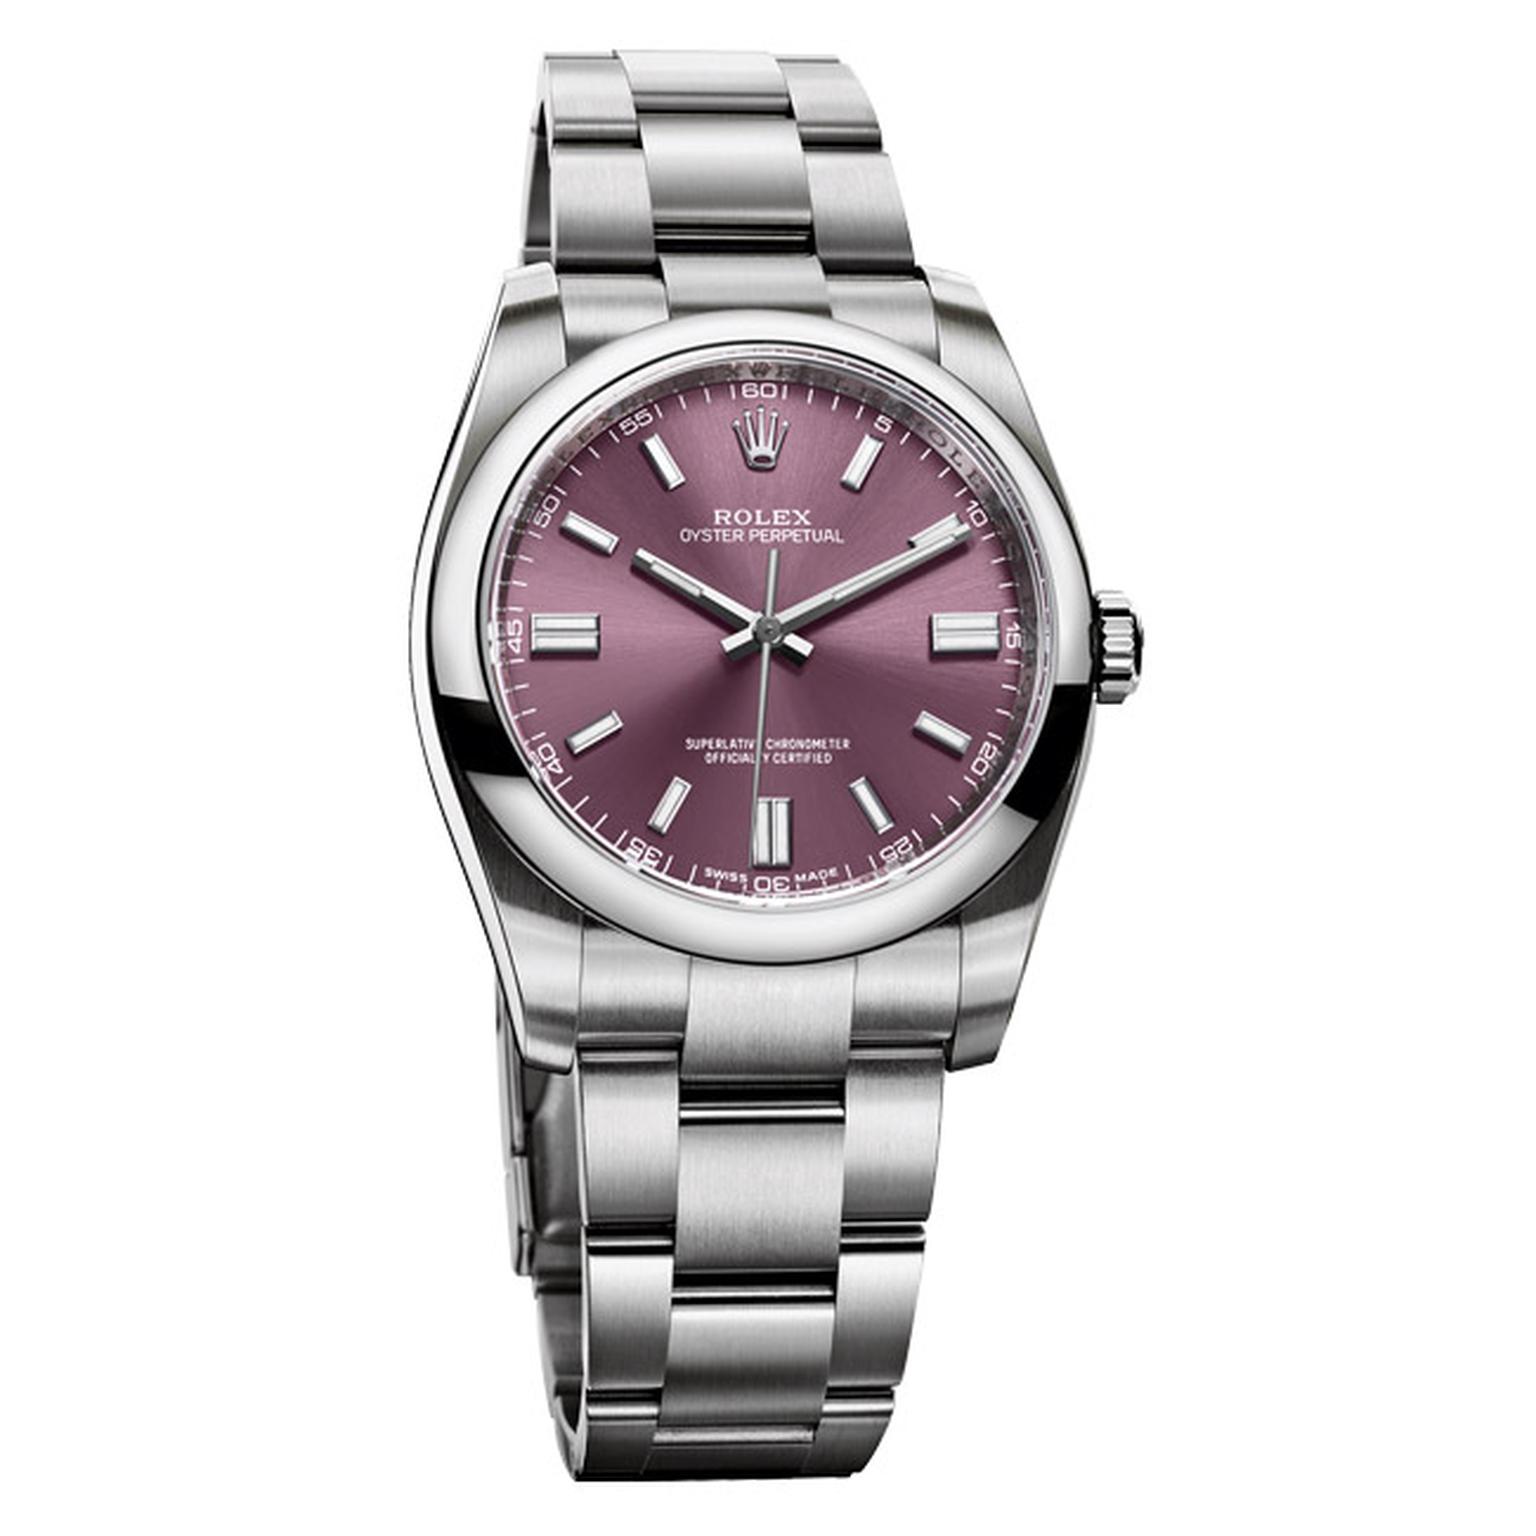 Rolex-Perpetual-Oyster-Main